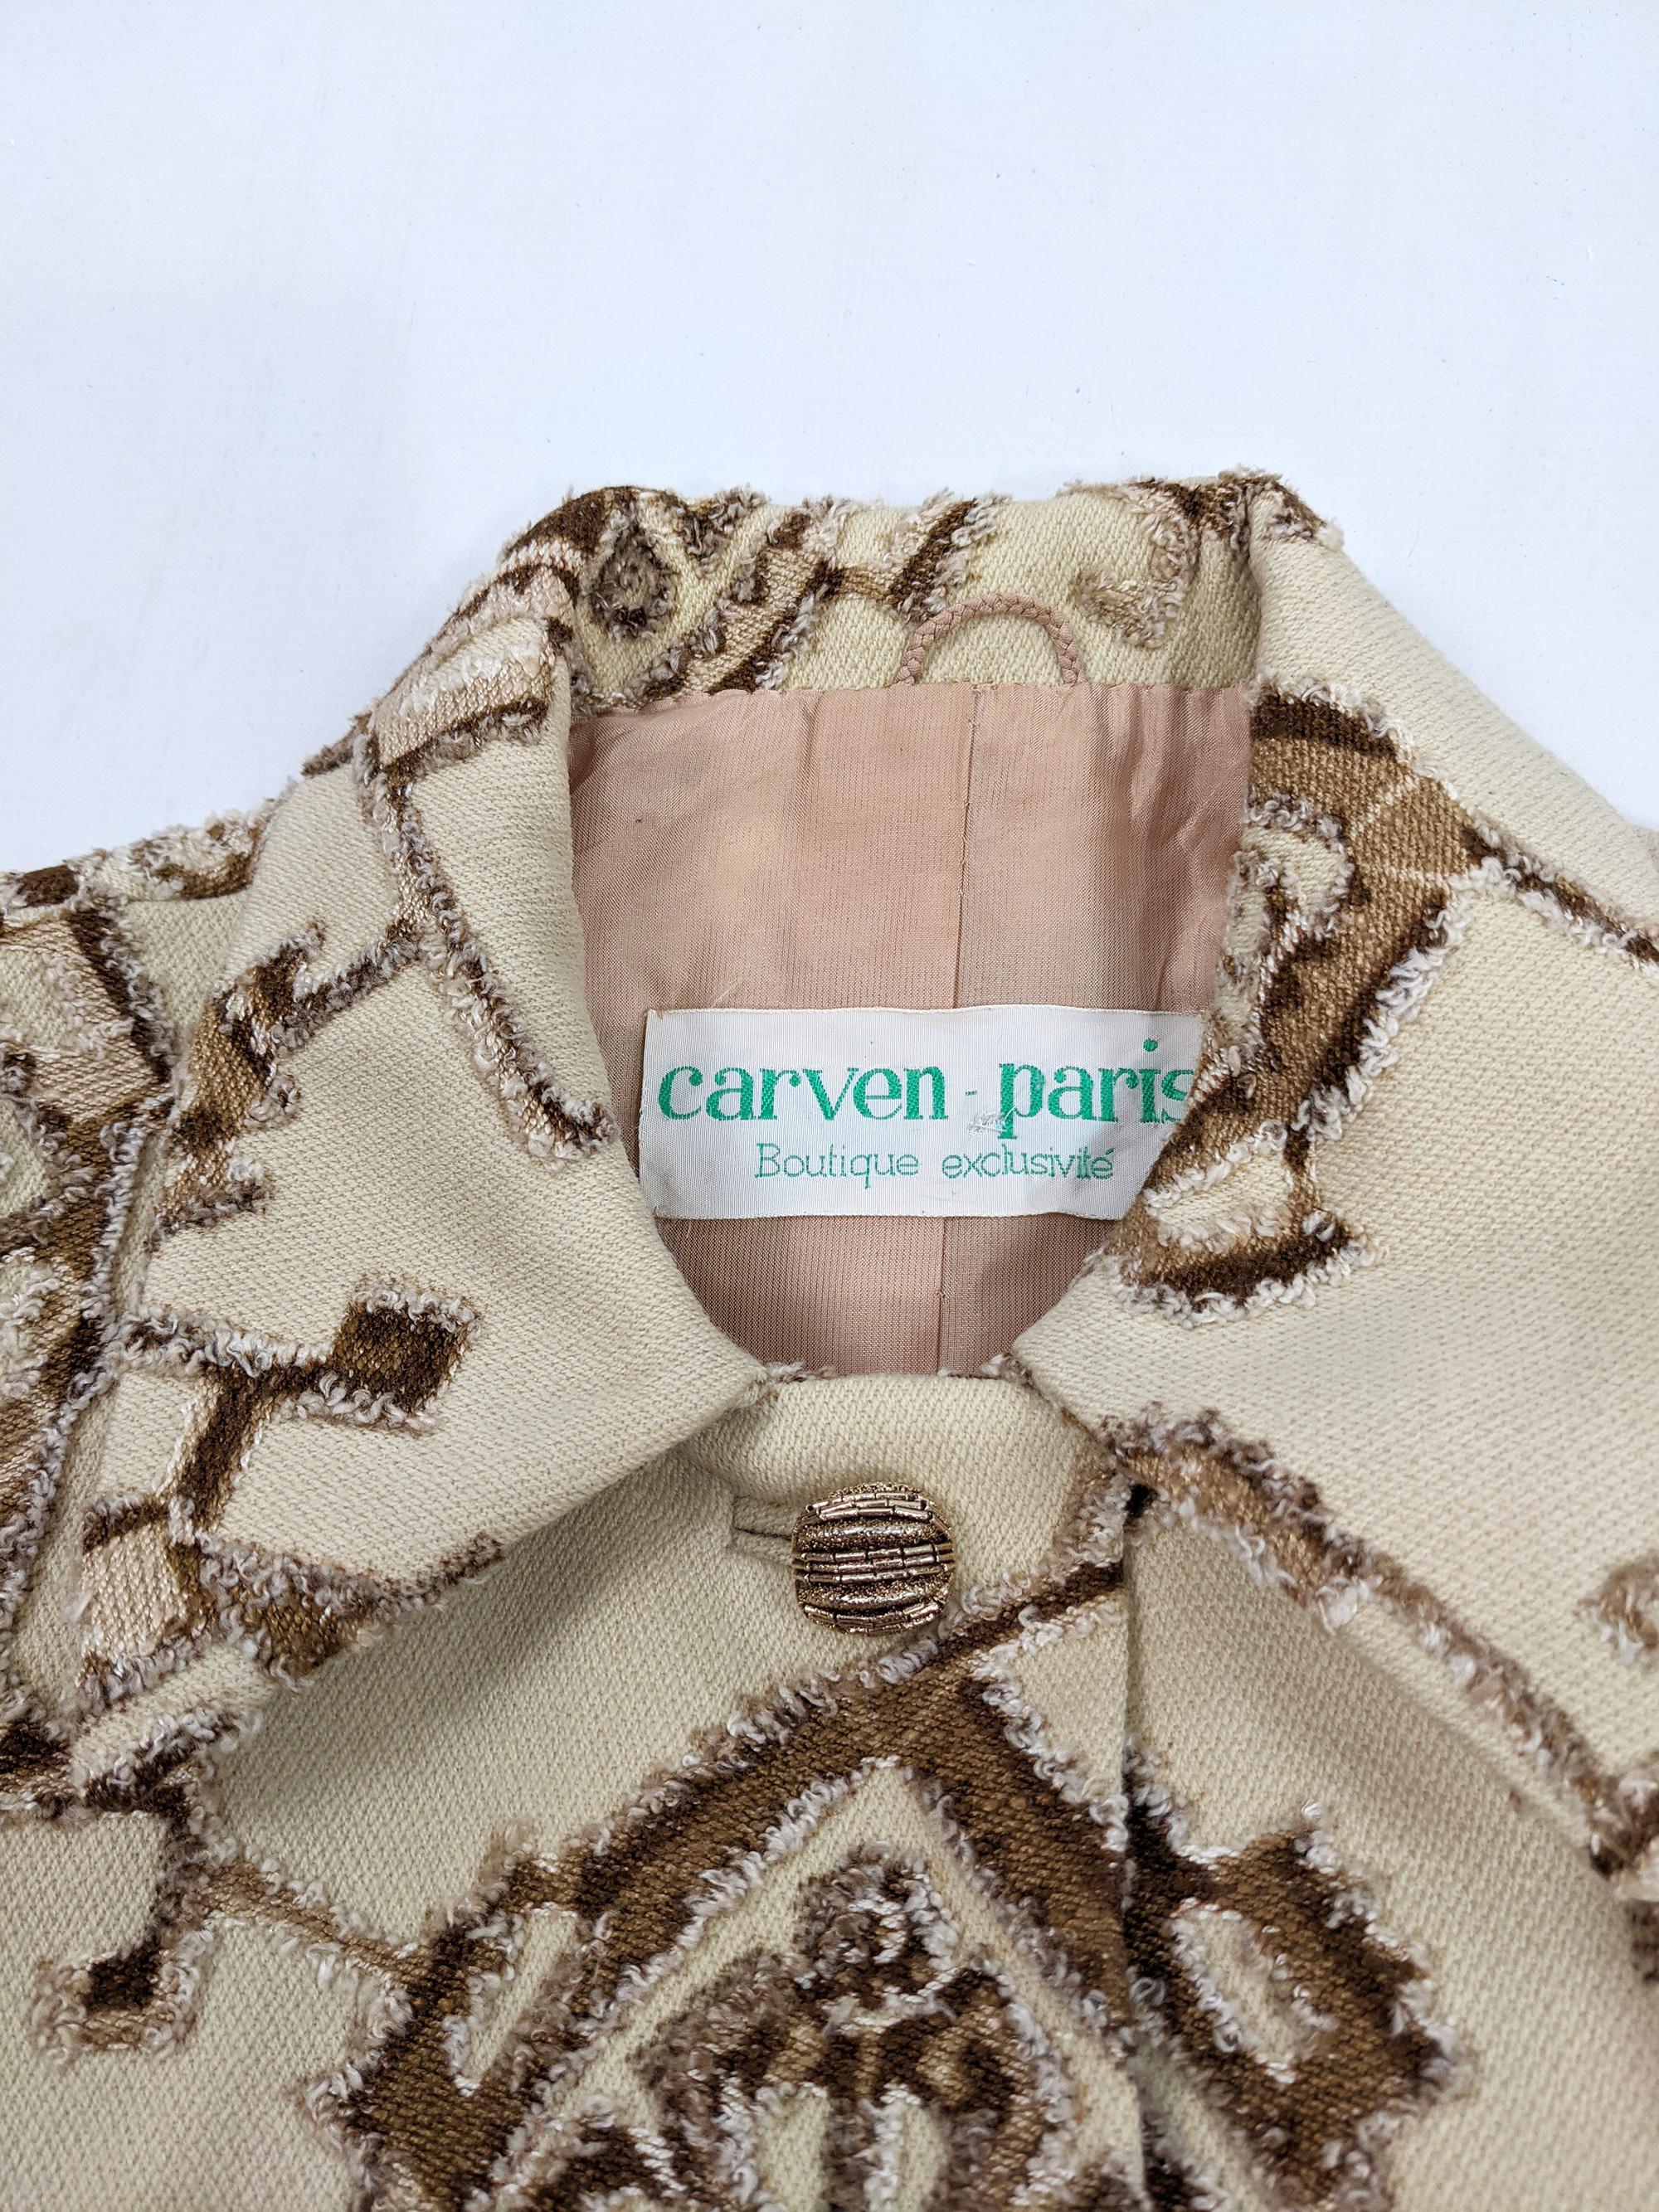 Carven Paris Vintage Cream Wool Tapestry Brocade Womens Tailored Jacket, 1960s For Sale 1